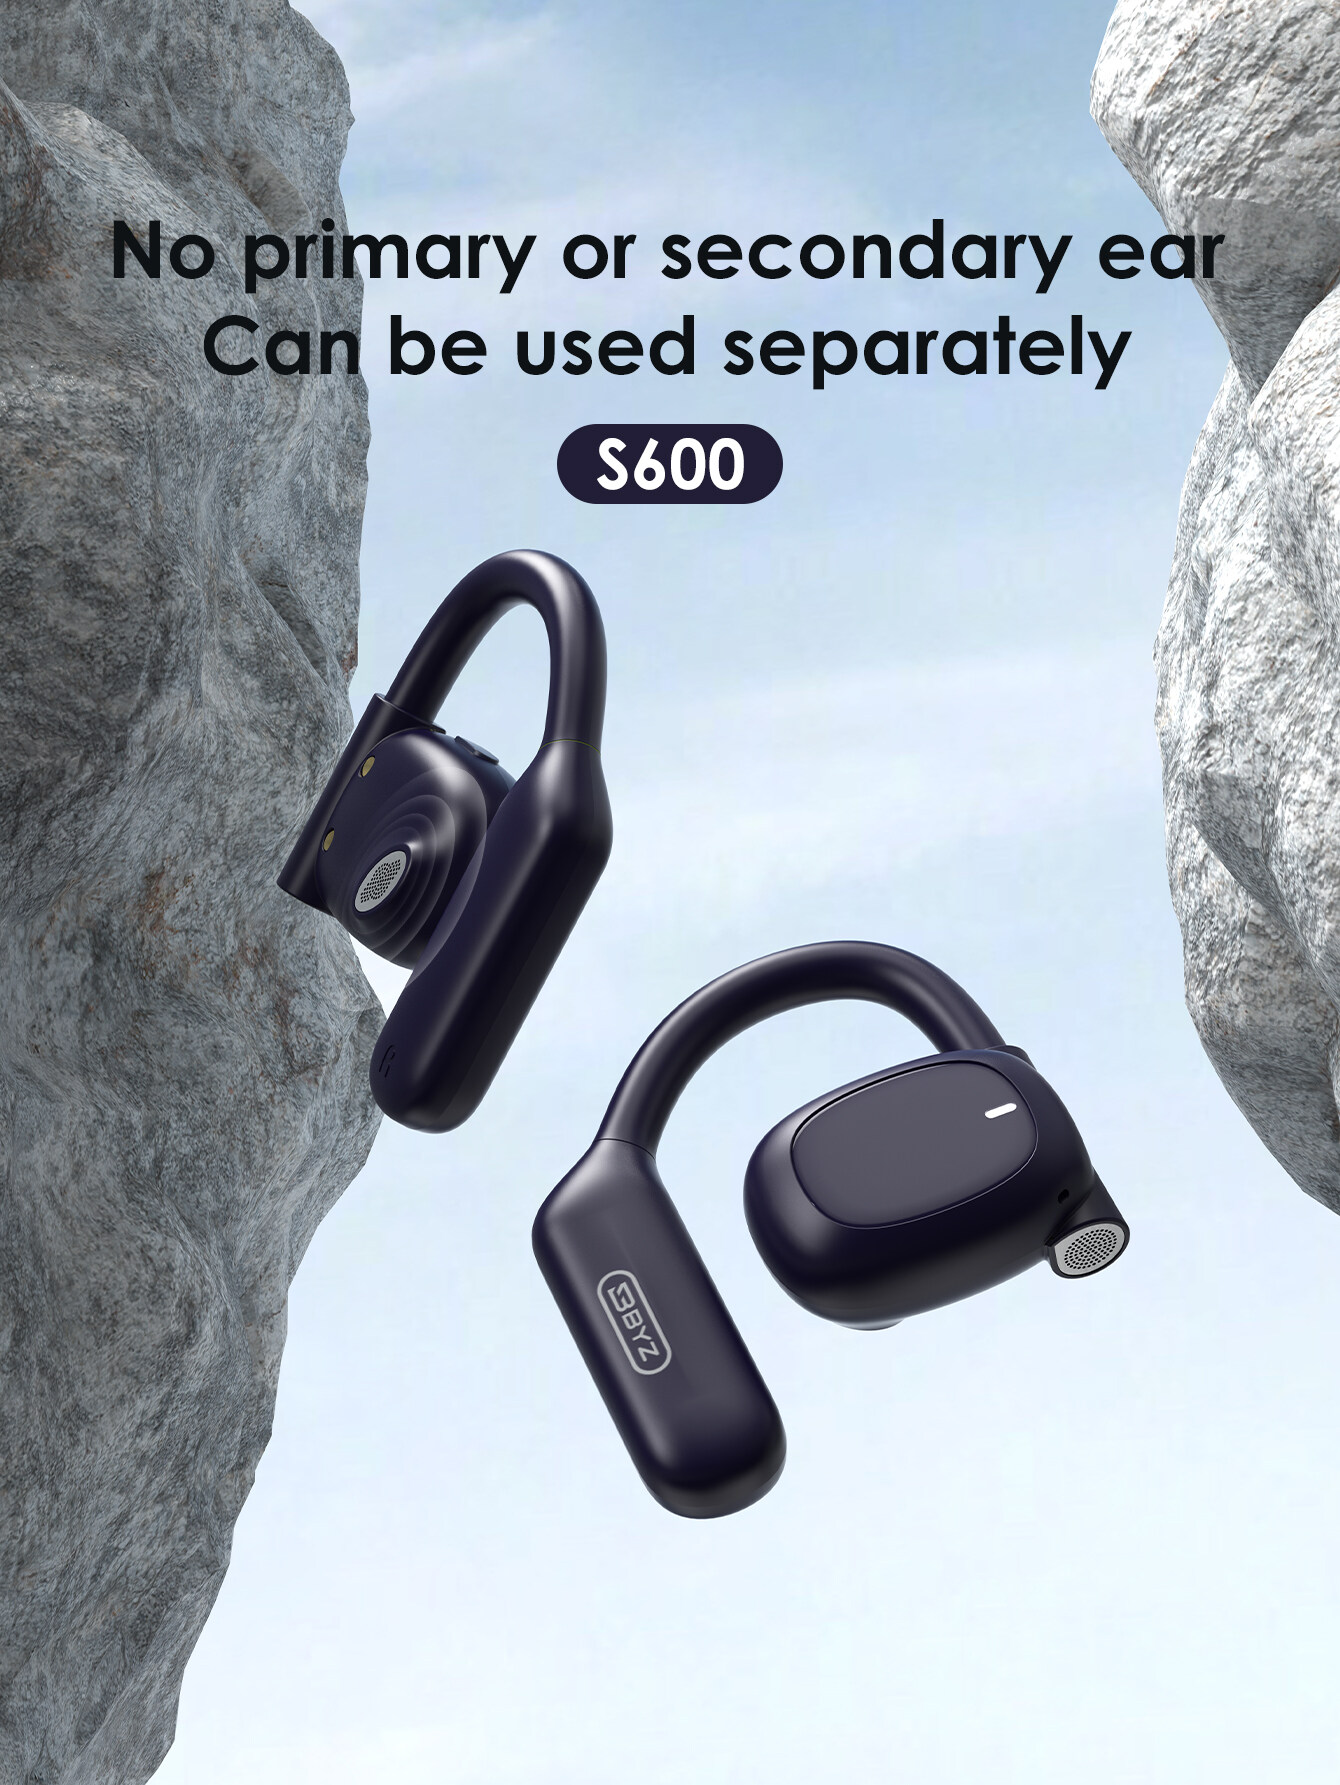 BYZ; Happyaudio; tws manufacturer; bluetooth earphone factory; headphone factory; china electronic manufacturing services;  Custom tws manufacturer China; Open Wearable Stereos; audio product business; earphone business; contact earphone company; earphone company info; tws business;earphone quote